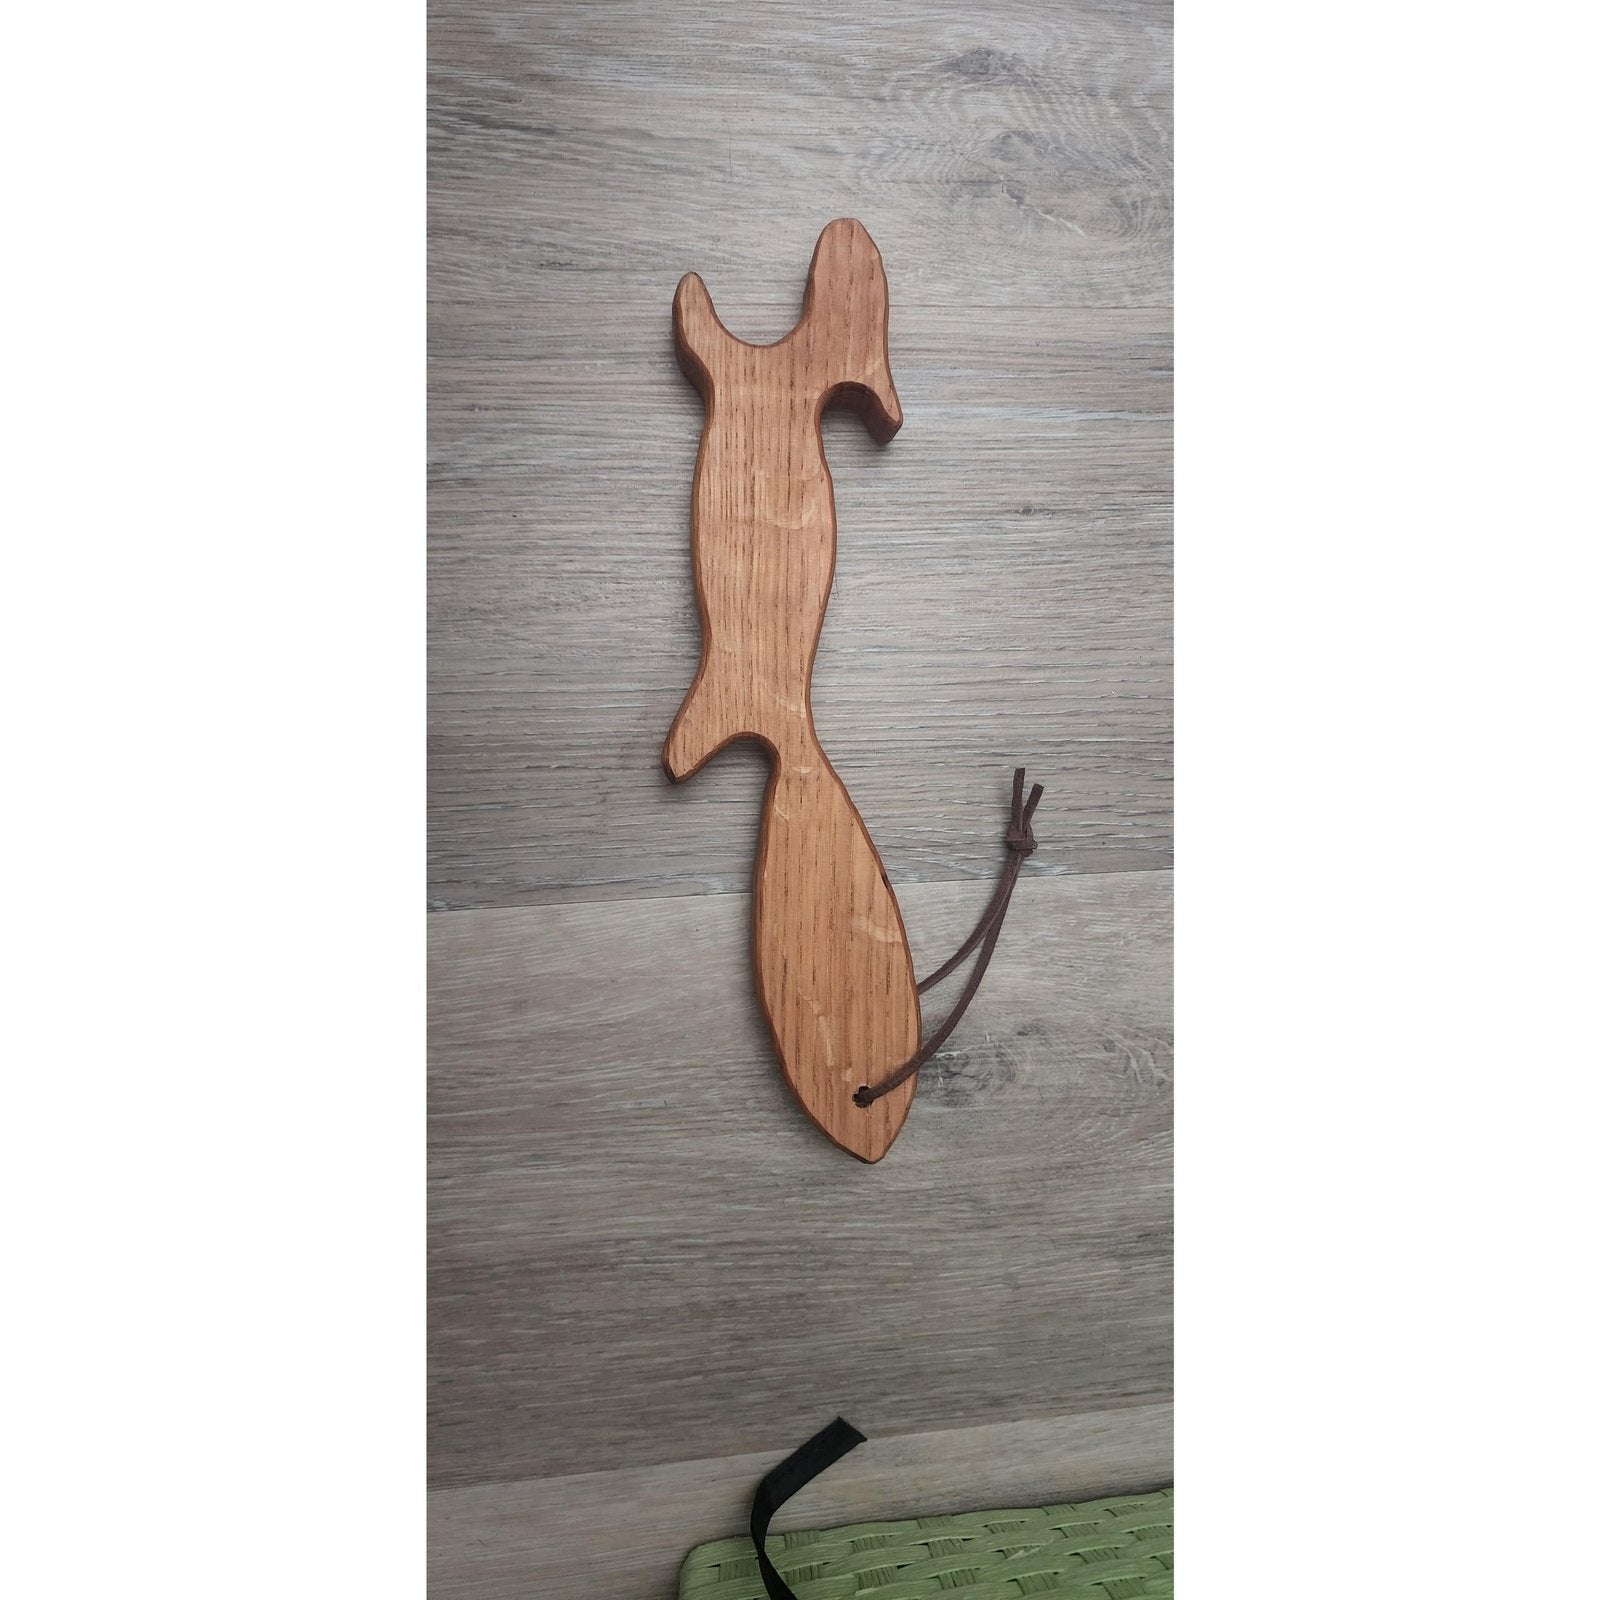 Wooden Squirrel oven rack puller push-me pull-you